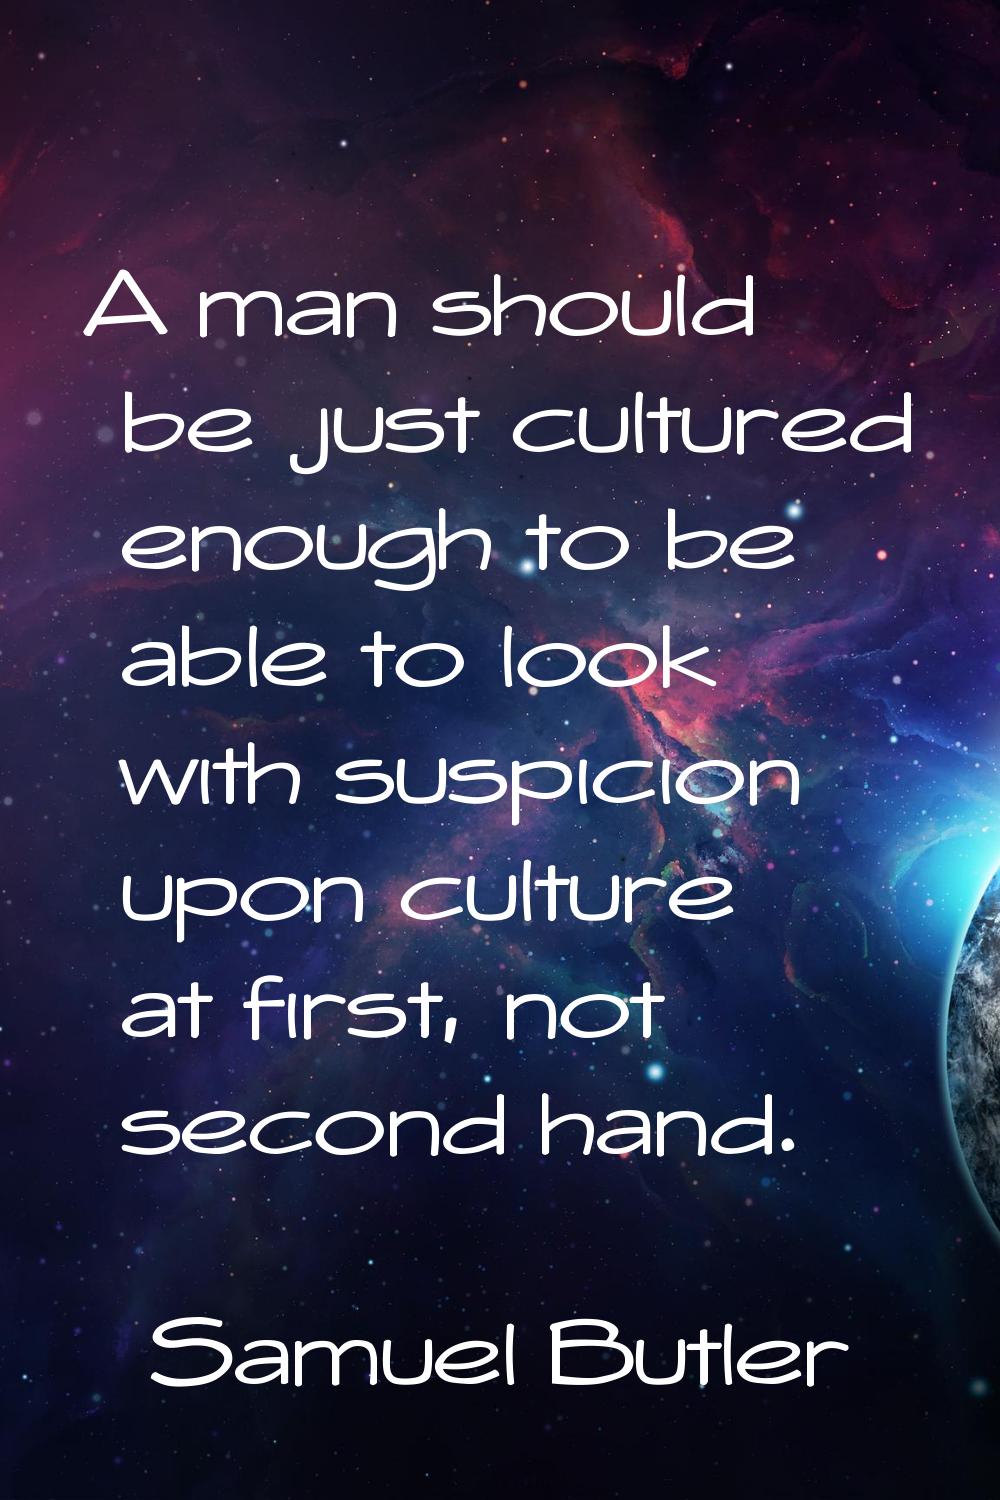 A man should be just cultured enough to be able to look with suspicion upon culture at first, not s